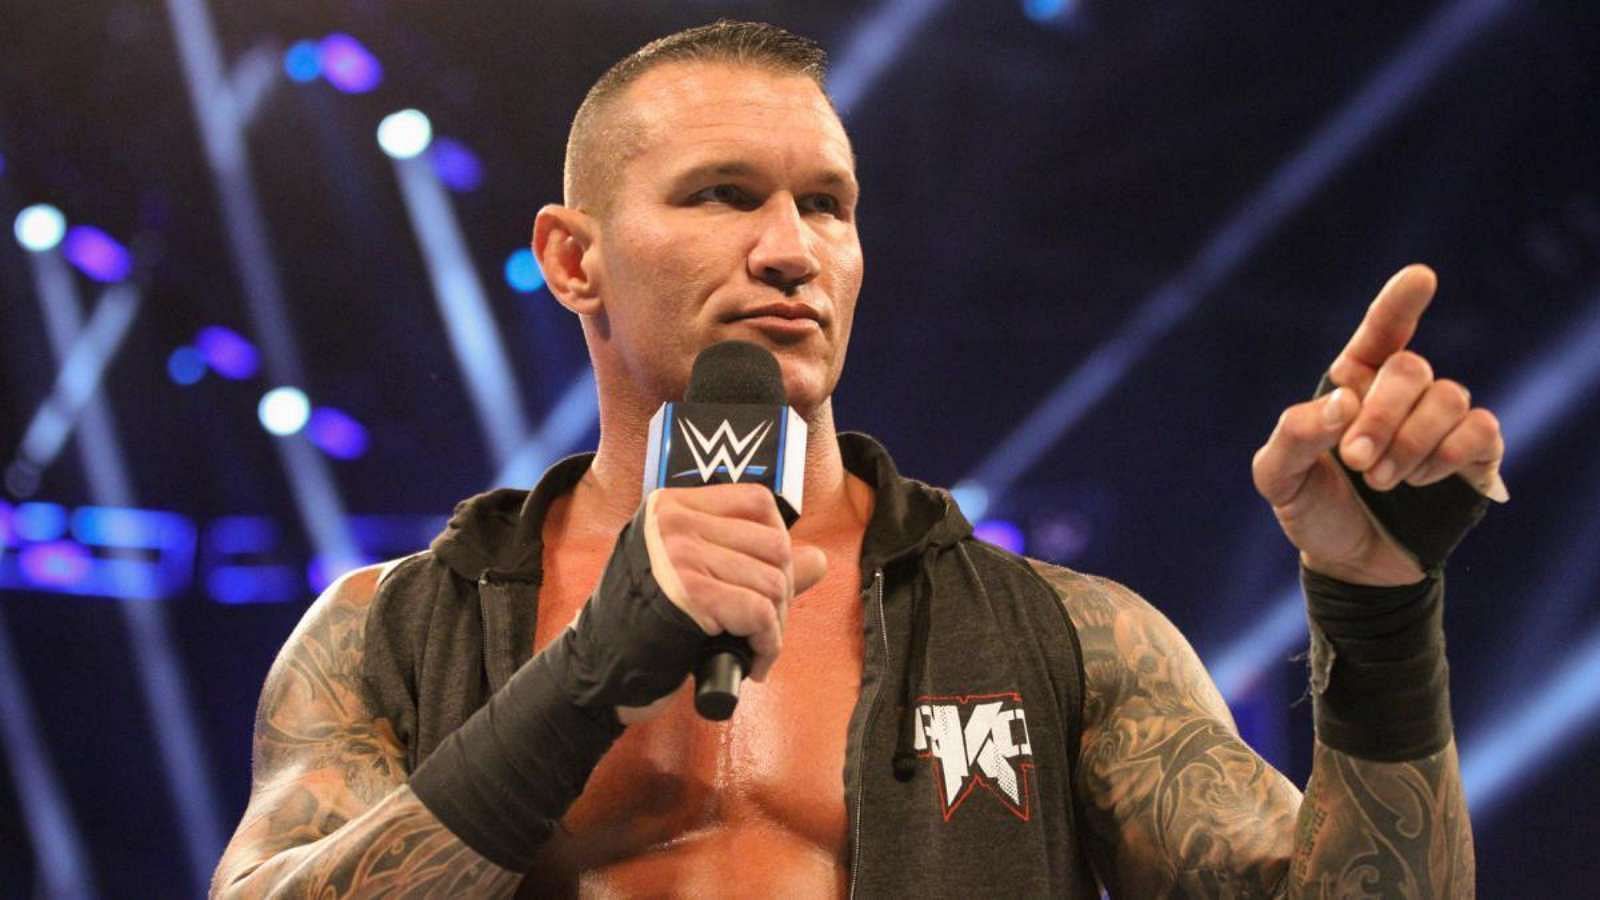 Talking to the WWE Universe could get Randy Orton back into the swing of things.